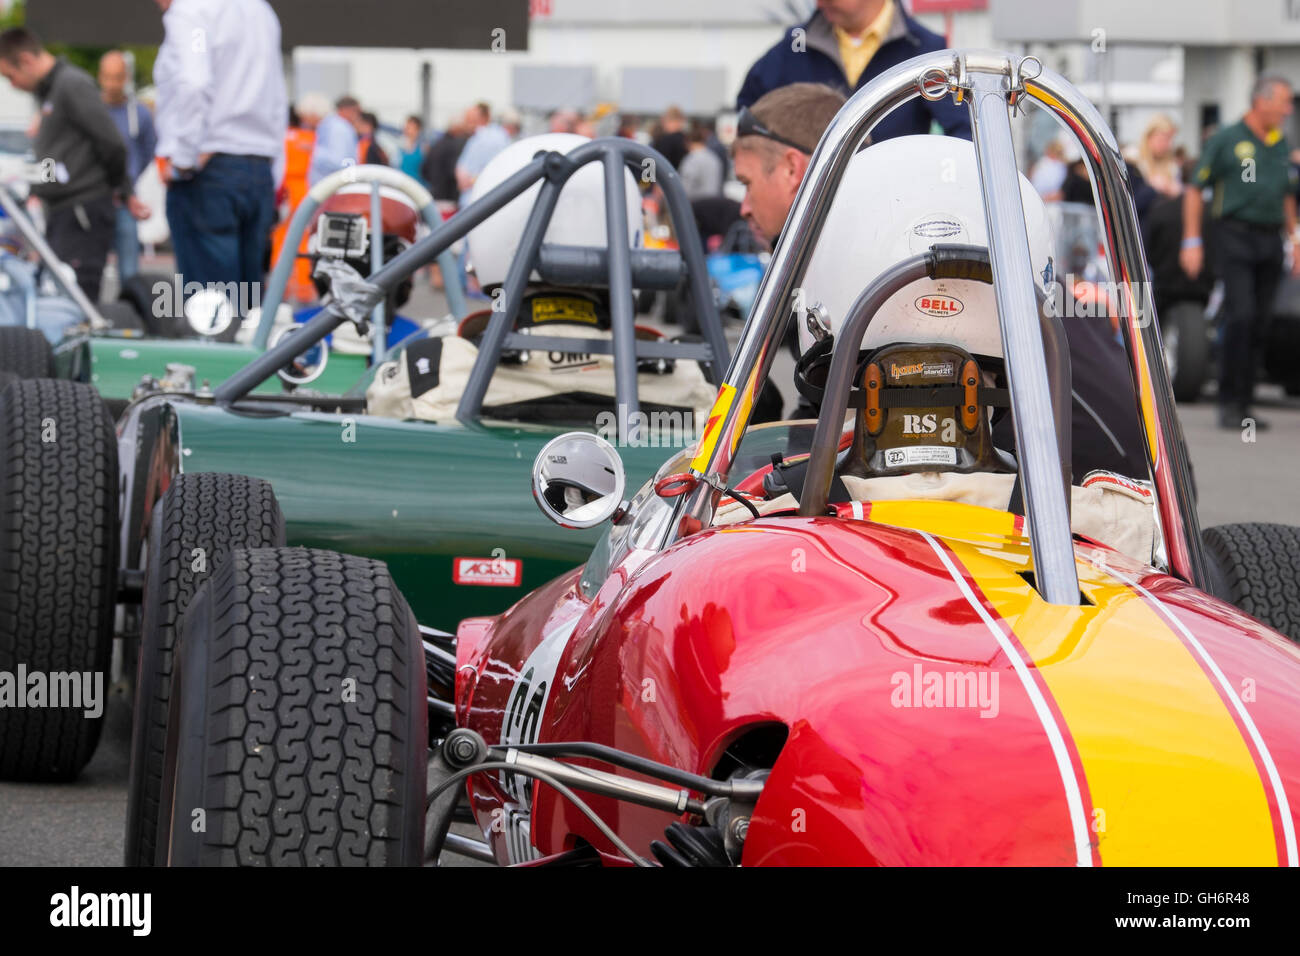 Formula Junior racing cars lined up in the paddock at the 2016 Silverstone Classic event, England, UK Stock Photo